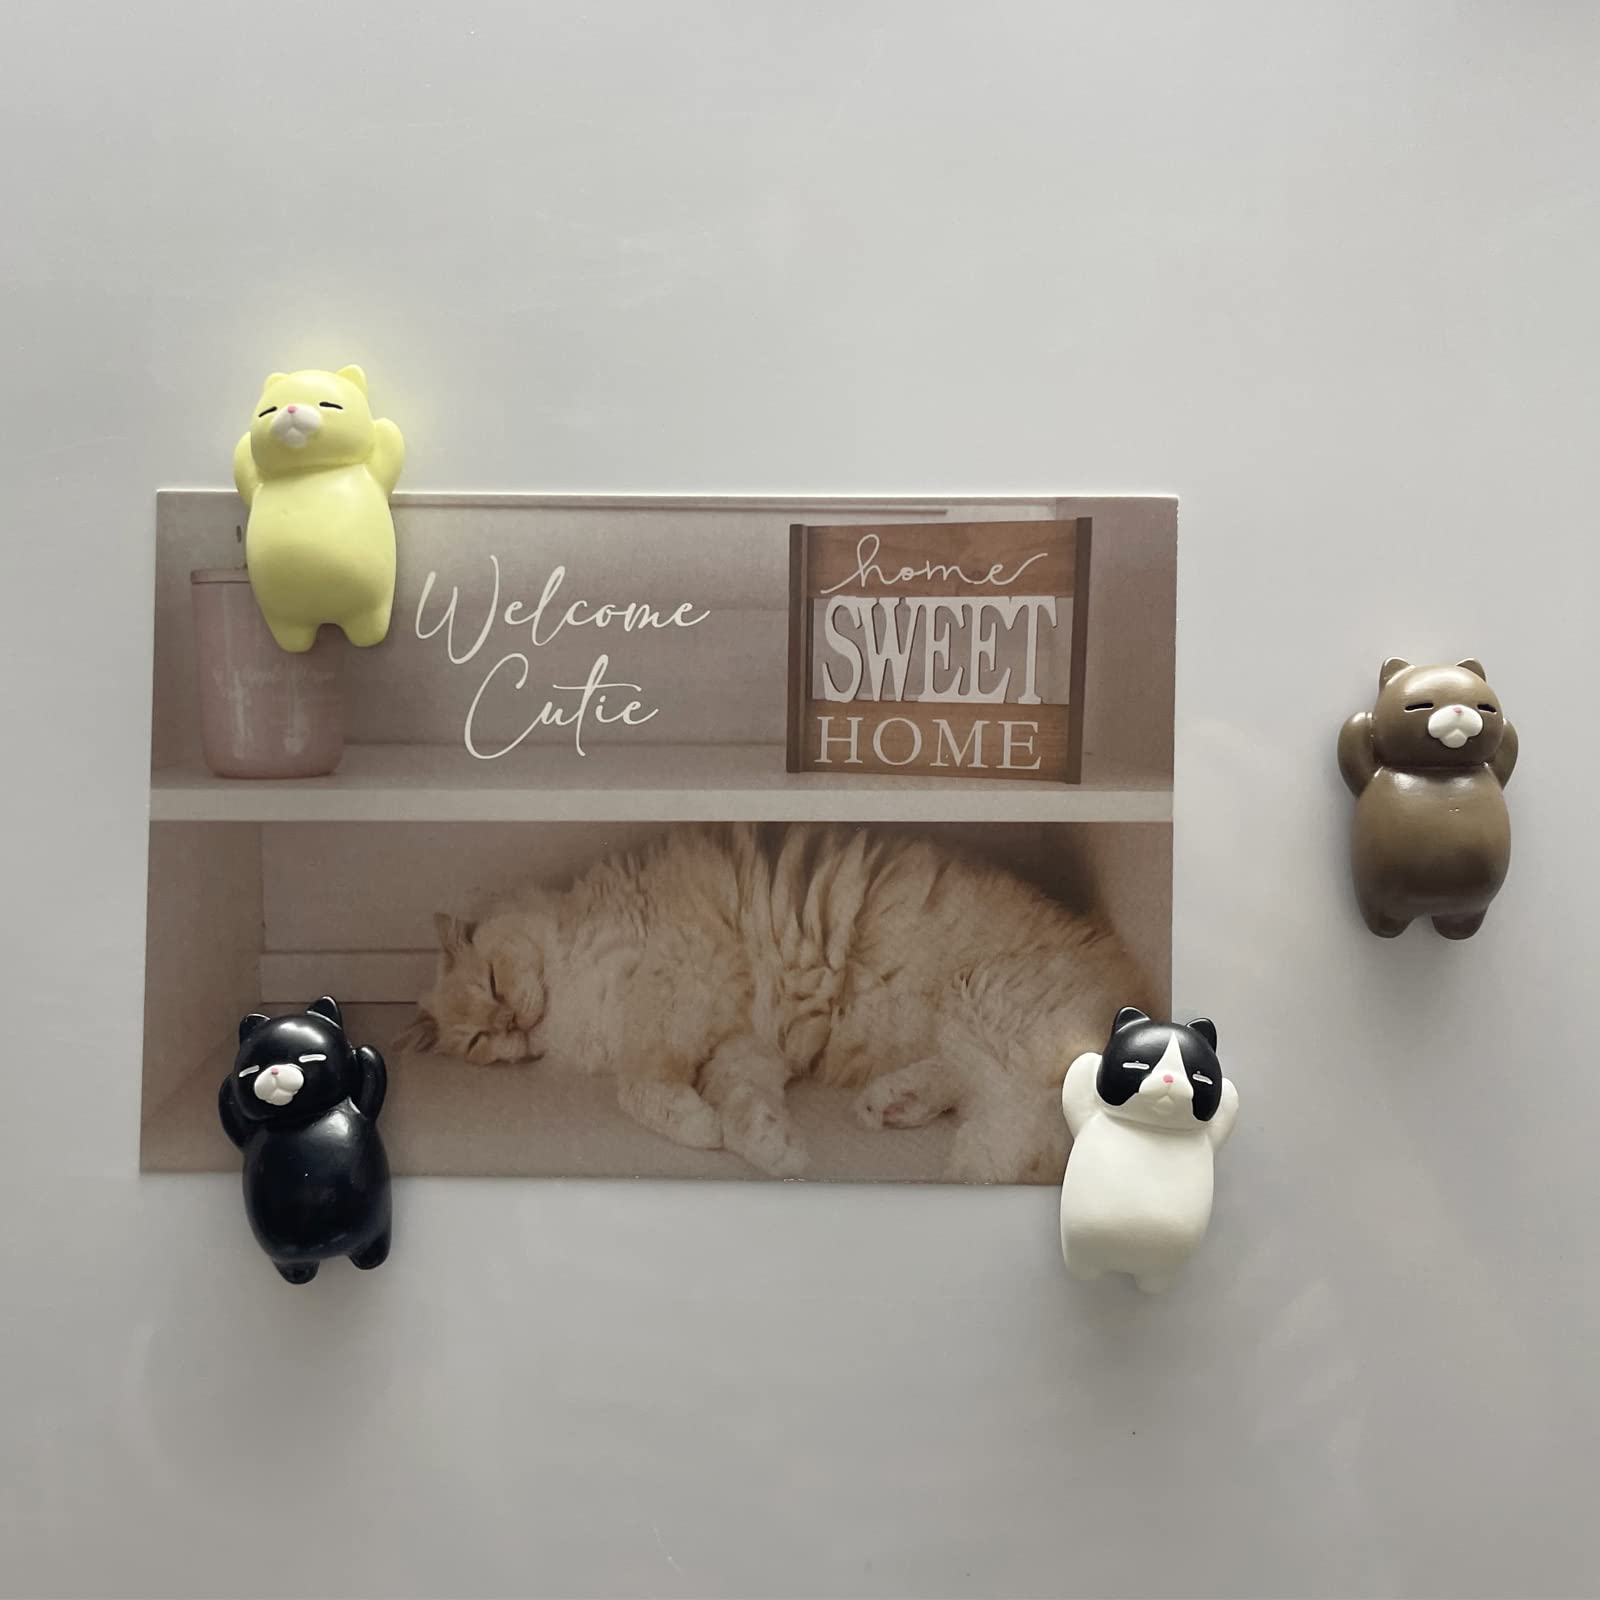 Cute Refrigerator Magnets,8 Pack Cat Magnets for Fridge Locker Decor Magnets 3D Cat Kawaii Magnets for Office,Kitchen,Whiteboard,House,Decorative Magnets Gifts for Cat Lovers